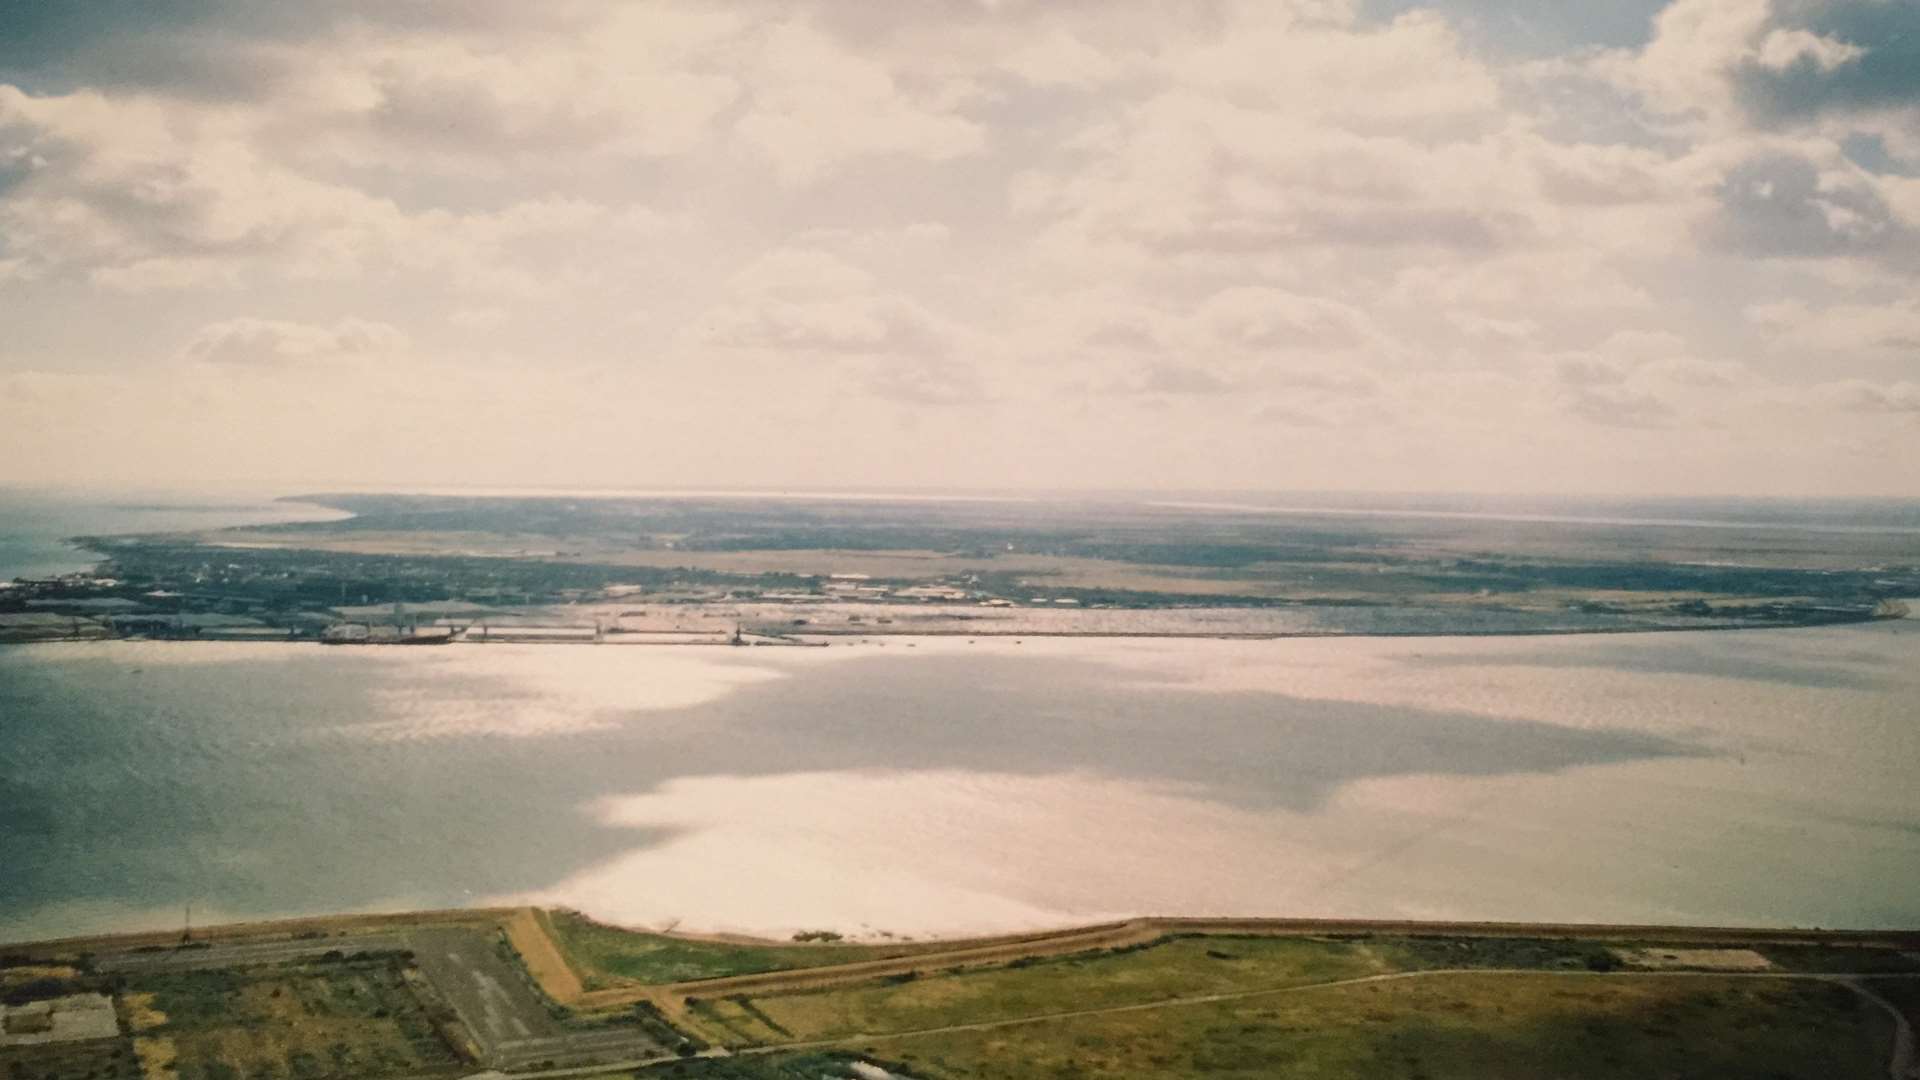 View of the Isle of Sheppey taken by Lee Knowles, 51, of Sittingbourne from the top of the now demolished Grain chimney in 2001.